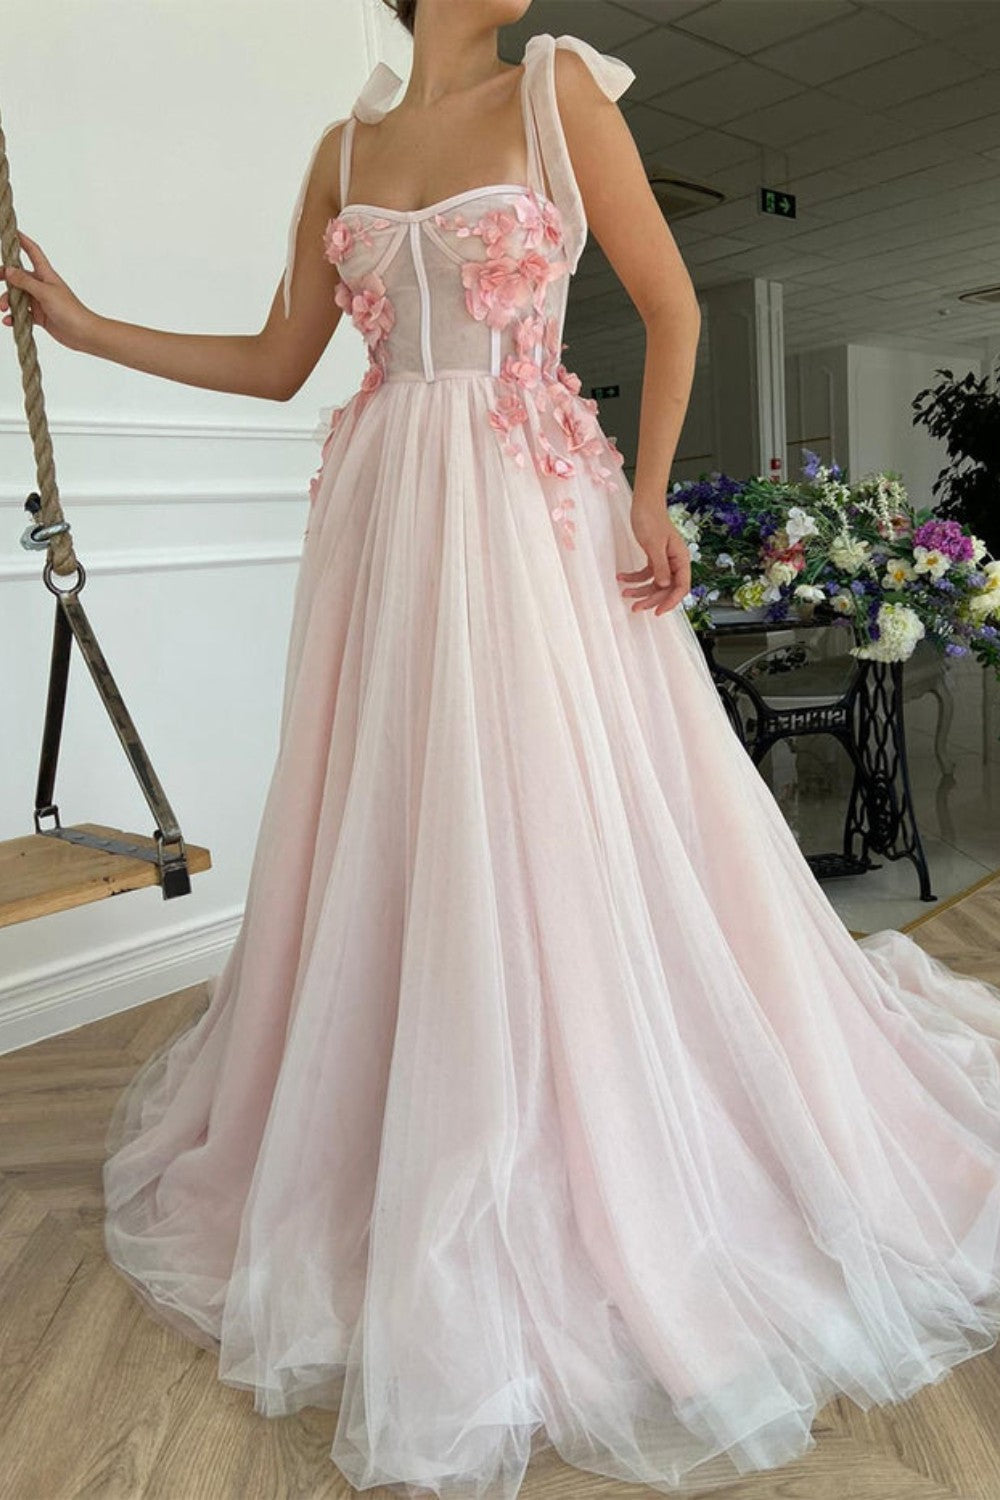 dressimeA-Line Sweetheart Tulle Applique Open Back Long with Flowers Prom Dresses 